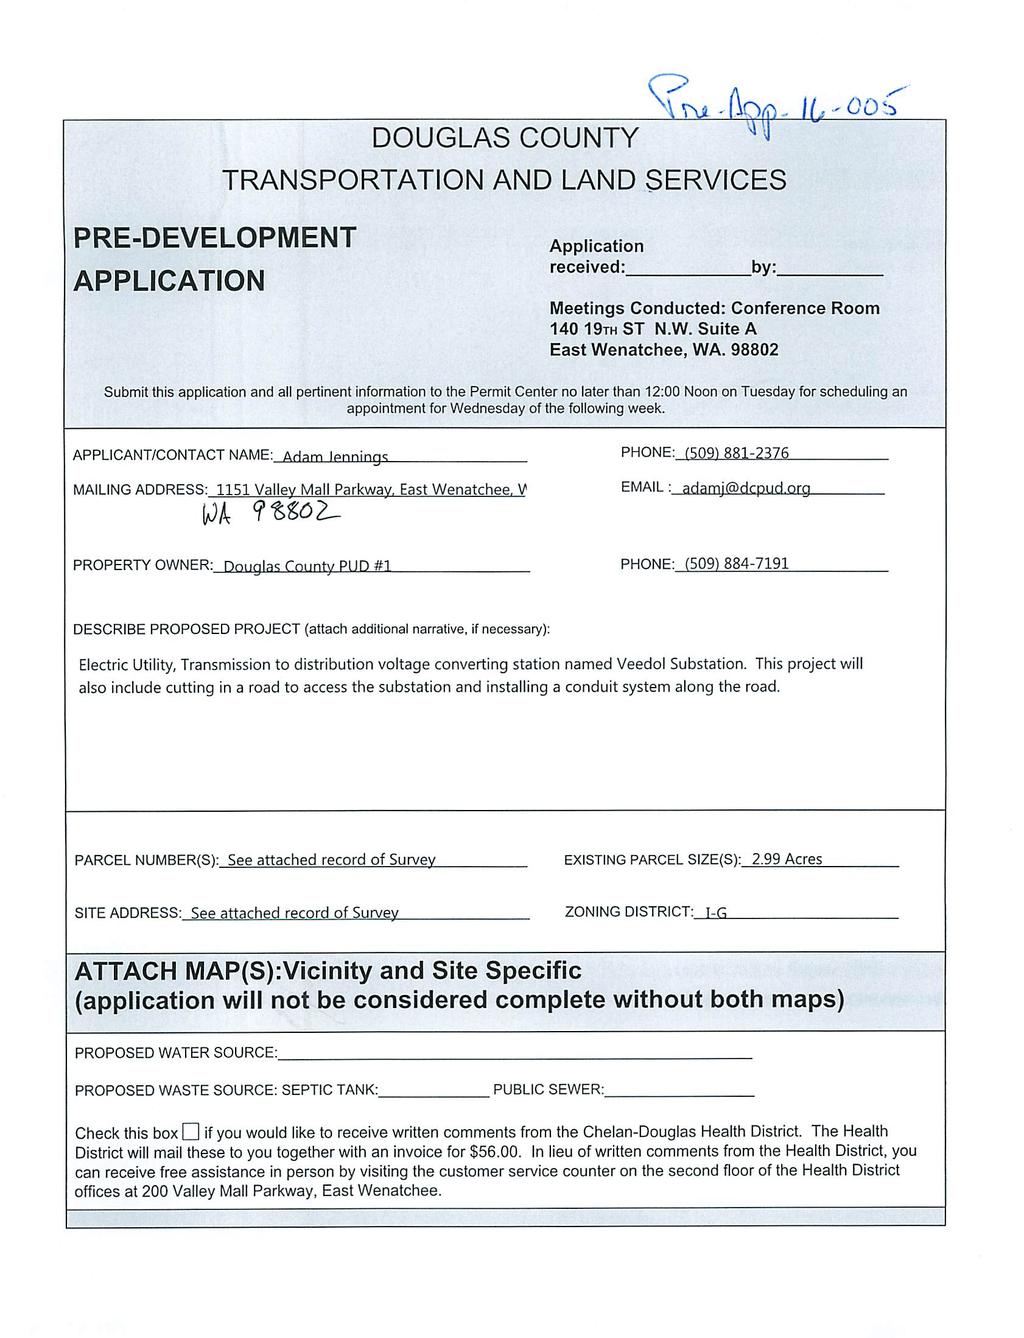 DOUGLAS COUNTY TRANSPORTATION AND LAND SERVICES PRE-DEVELOPMENT APPLICATION Application received: by: Meetings Conducted: Conference Room 10 19th ST N.W. SuiteA East Wenatchee, WA.